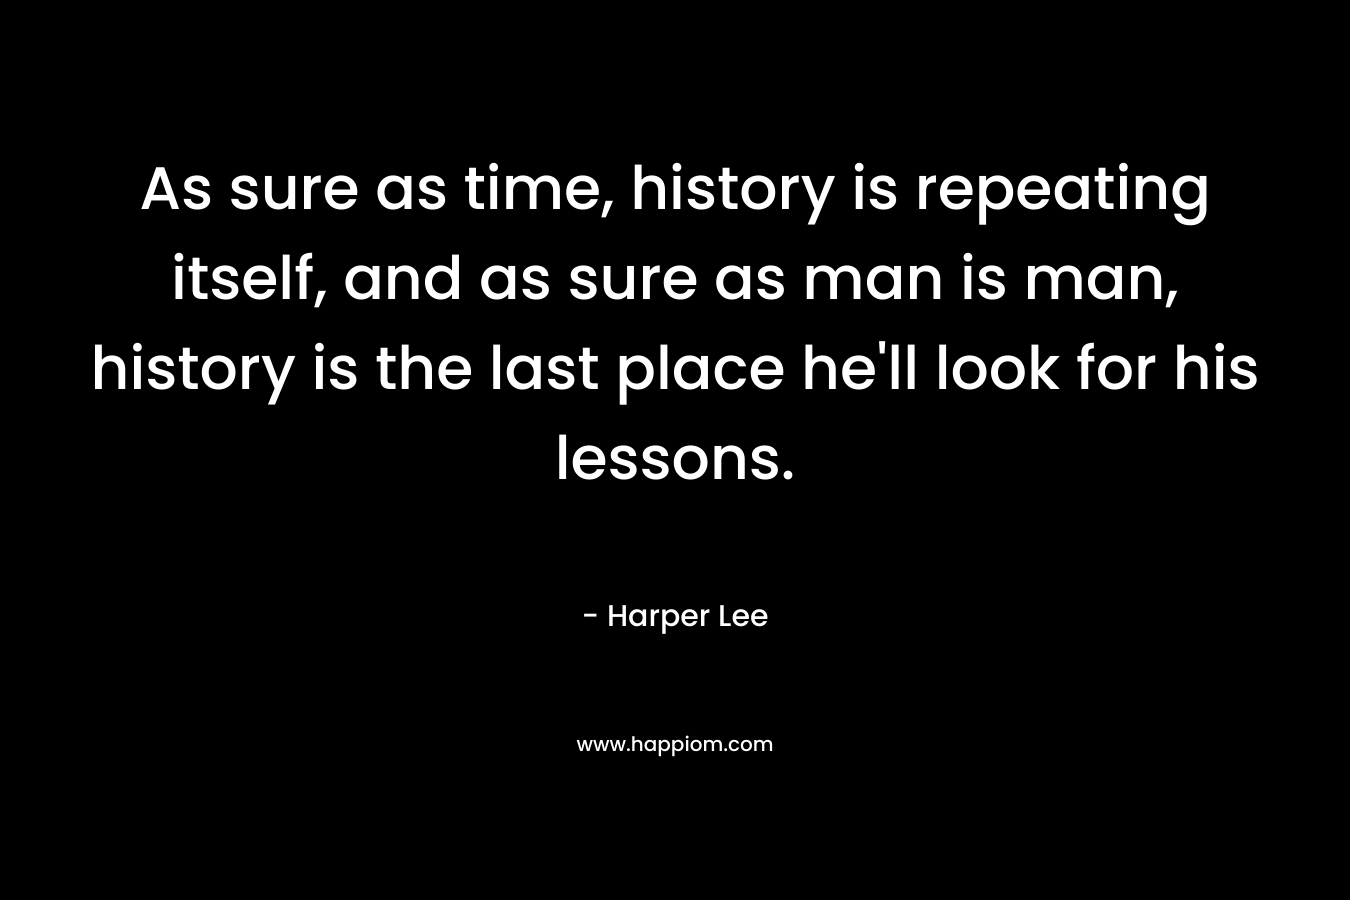 As sure as time, history is repeating itself, and as sure as man is man, history is the last place he’ll look for his lessons. – Harper Lee